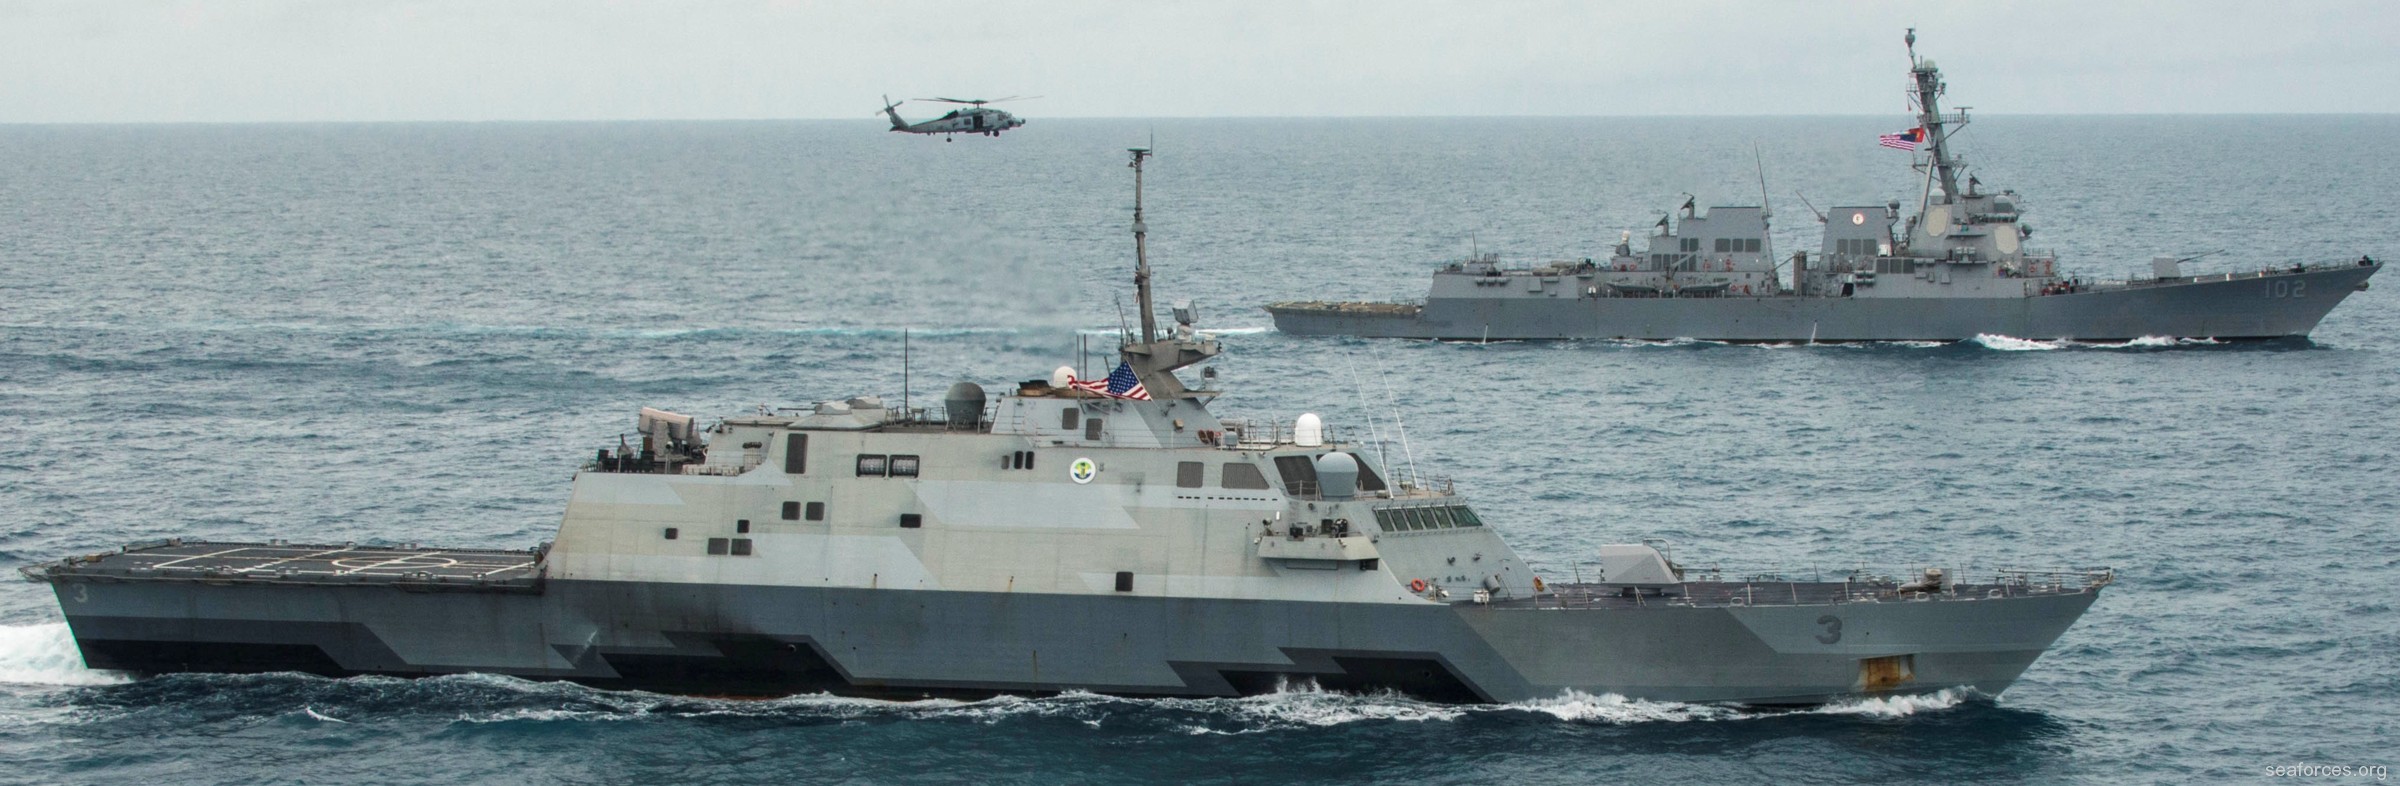 lcs-3 uss fort worth littoral combat ship freedom class us navy 21